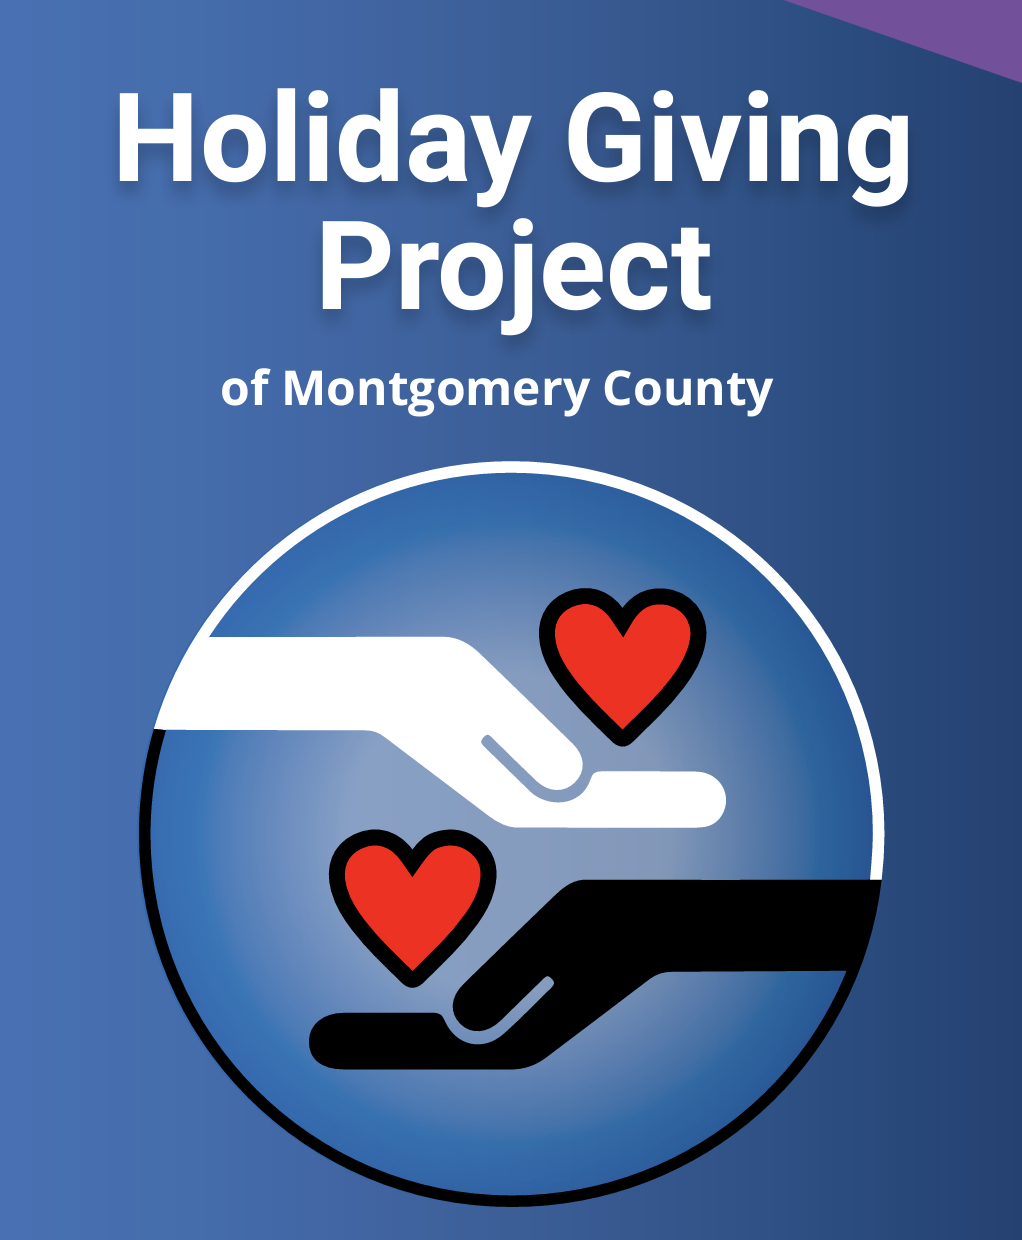 Holiday Giving Project Seeking Partners to Help During This Year’s Campaign 